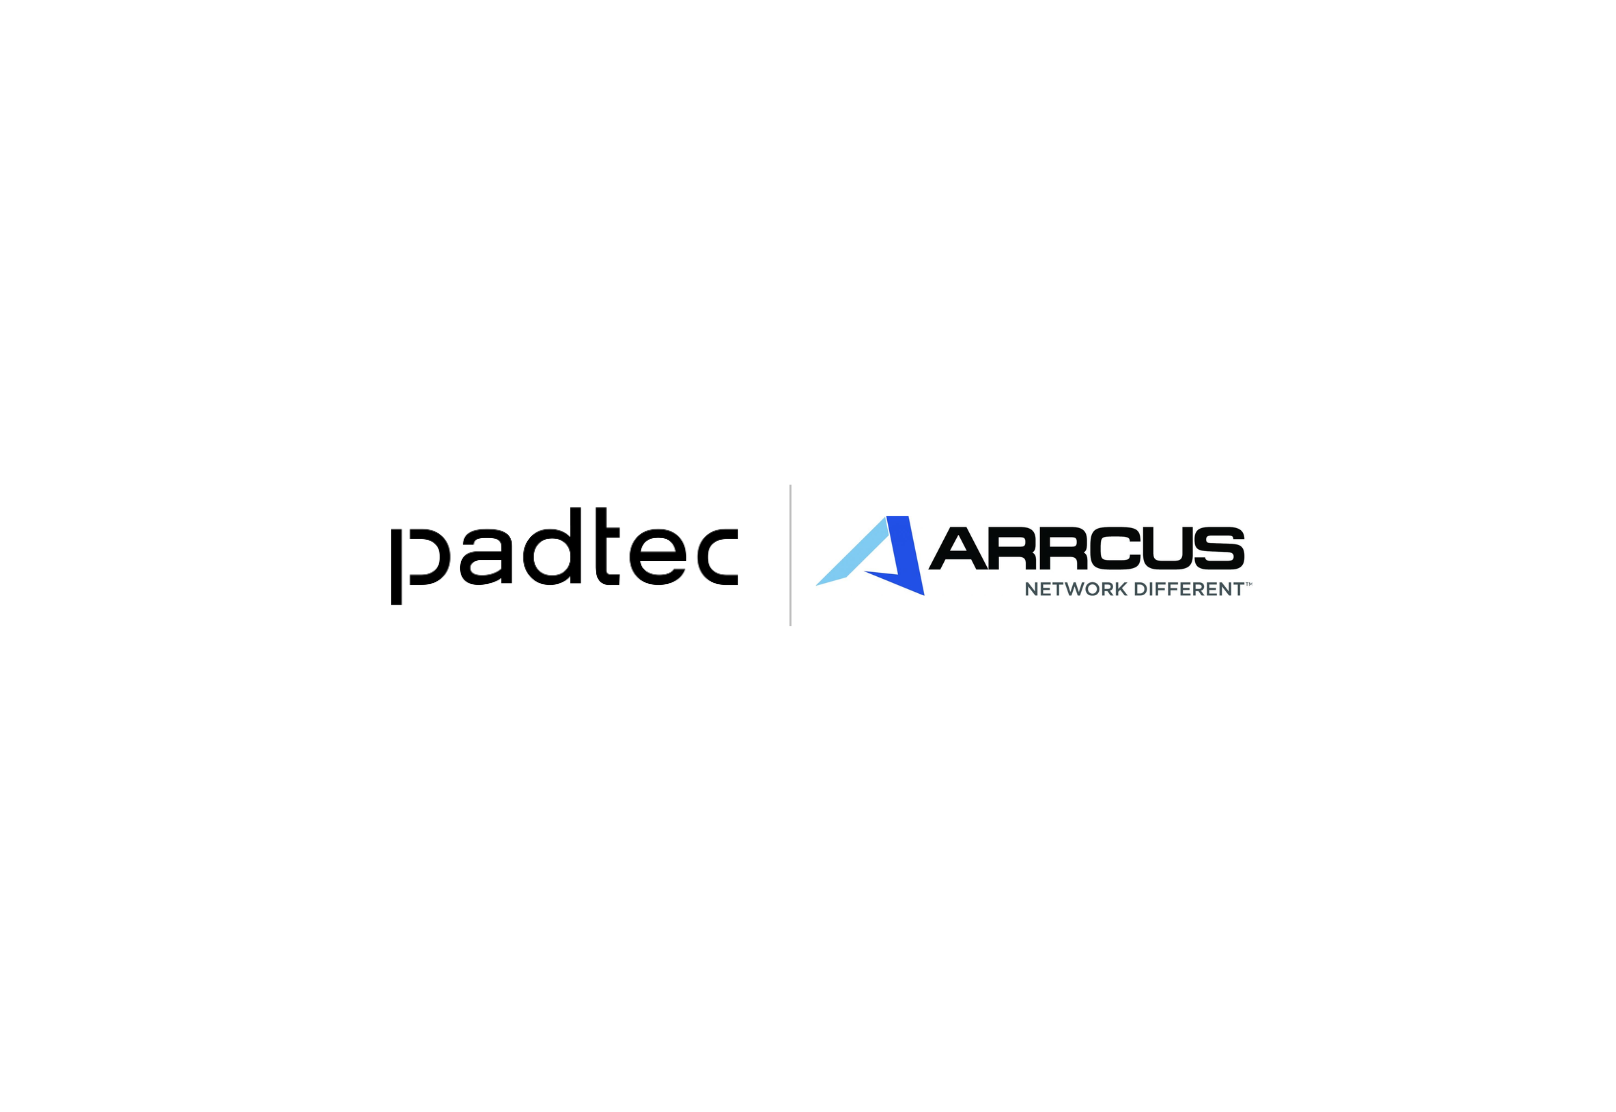 Padtec announces partnership with Arrcus with a focus on new segments of the communication network market